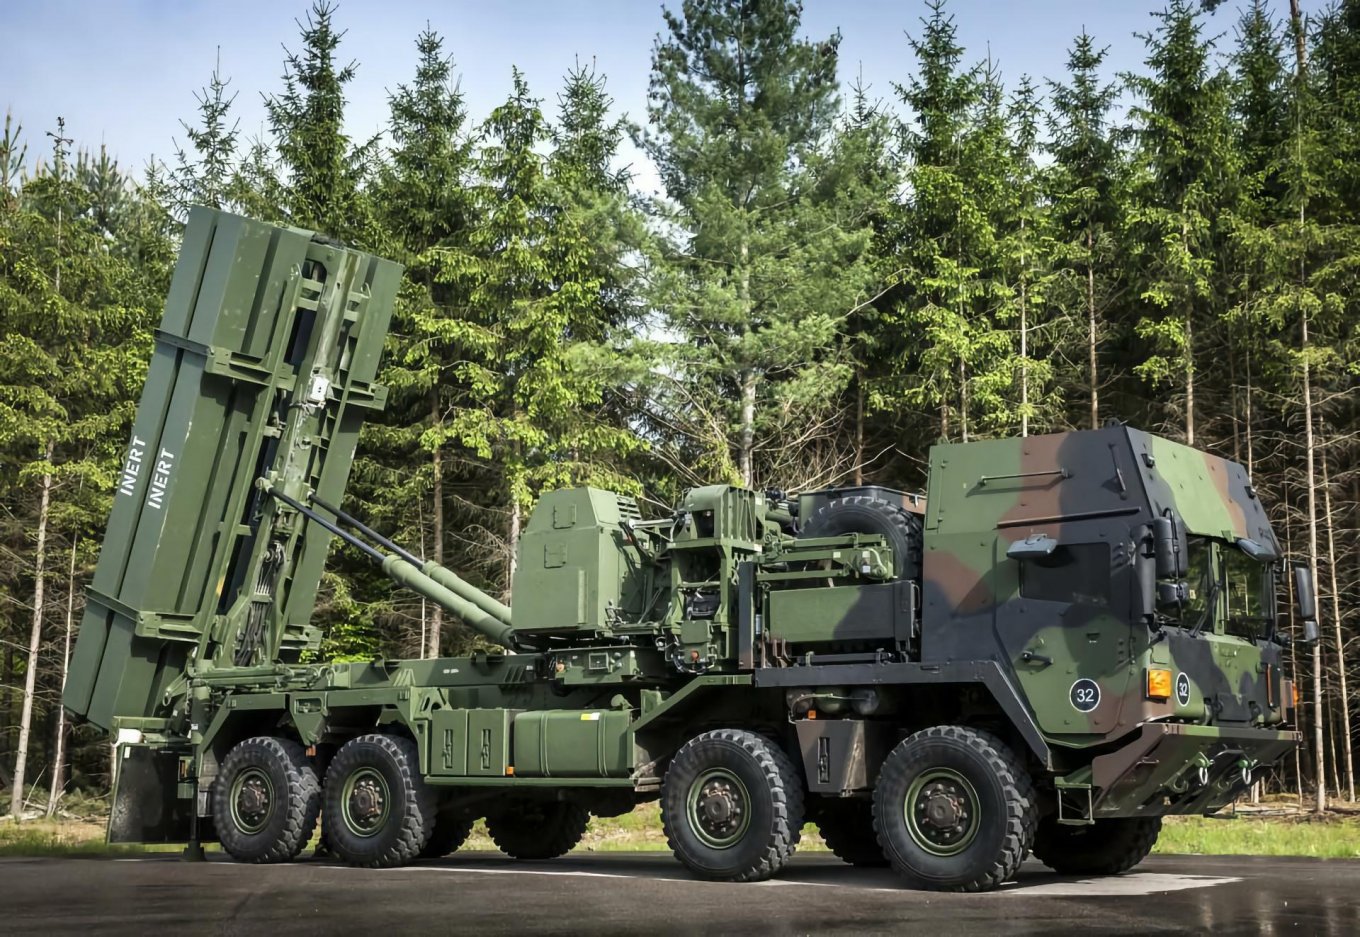 IRIS-T SLM is medium-range air defense system with the ability to destroy targets at a distance of up to 40 km and 20 km in height, France and Germany Will Continue Support Ukraine With Arms and Training Despite Putin's Statements, Defense Express